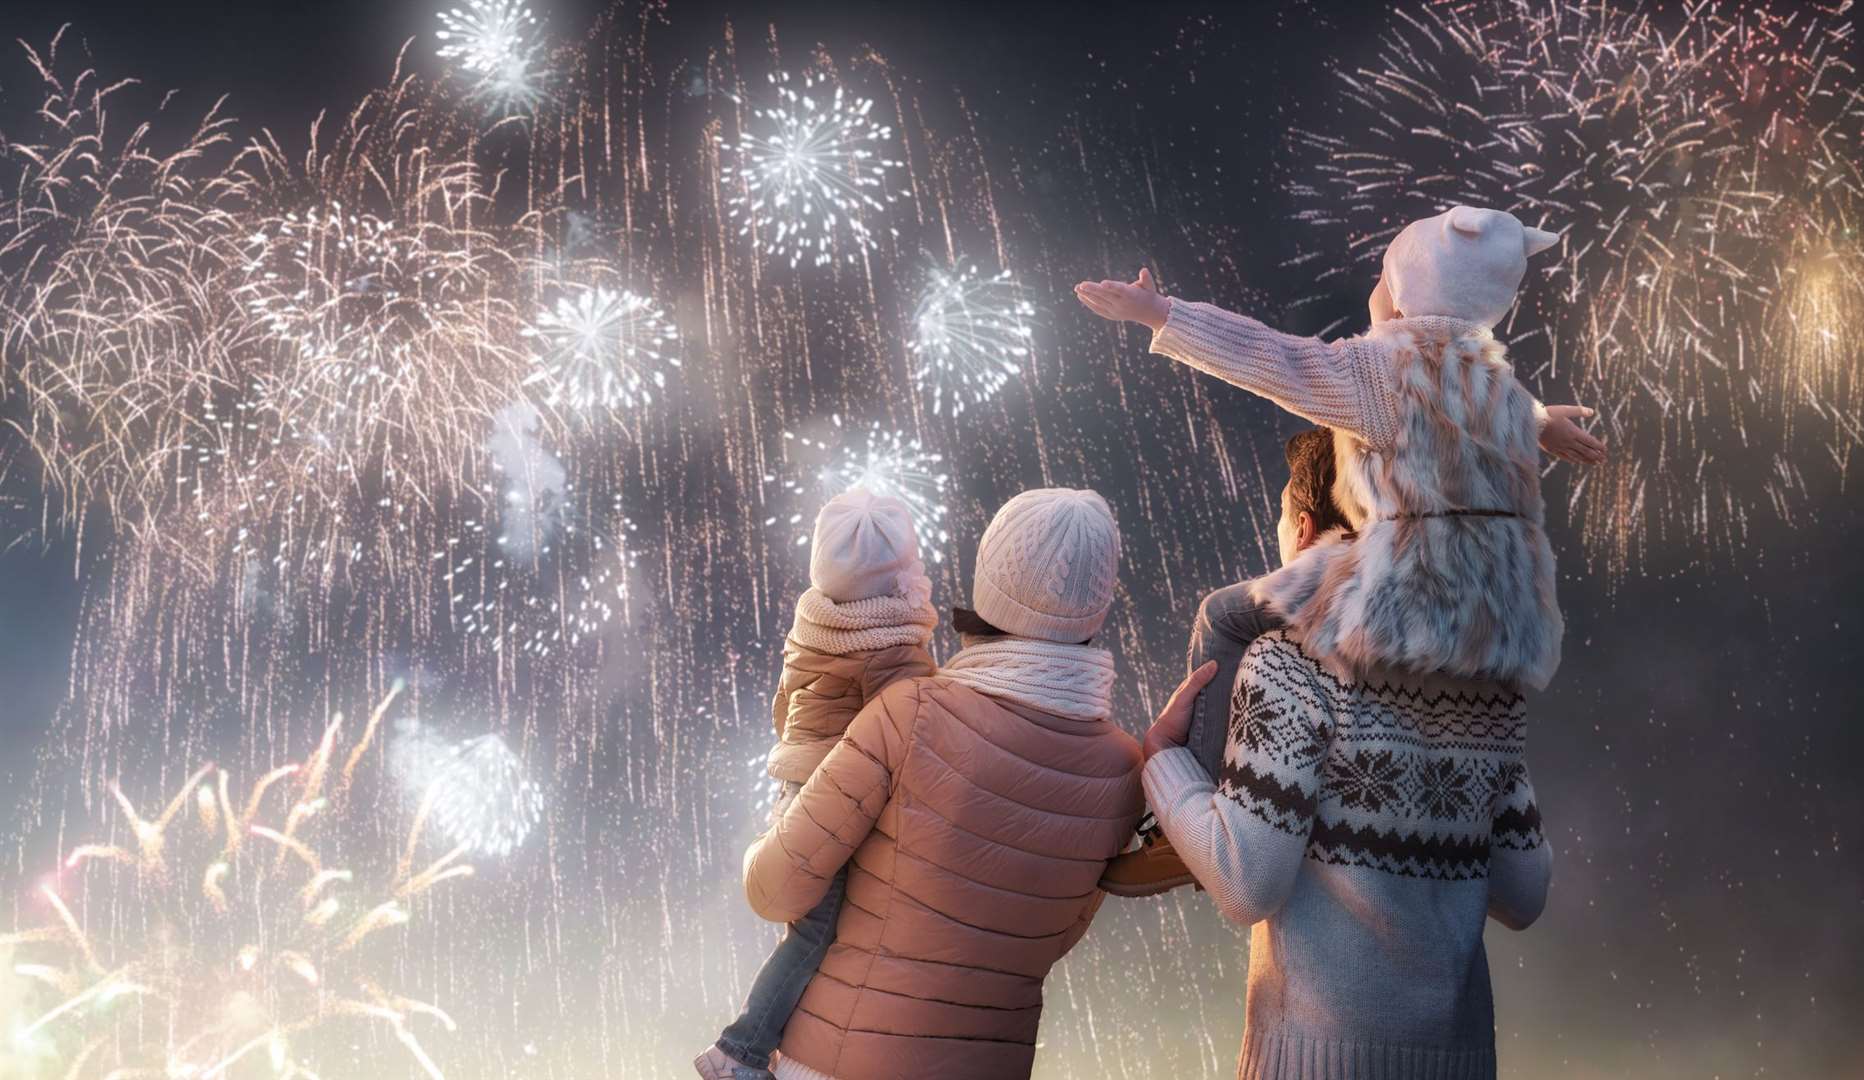 Fireworks will be part of the excitement at Phoenix fireworks' Winter Wonderland